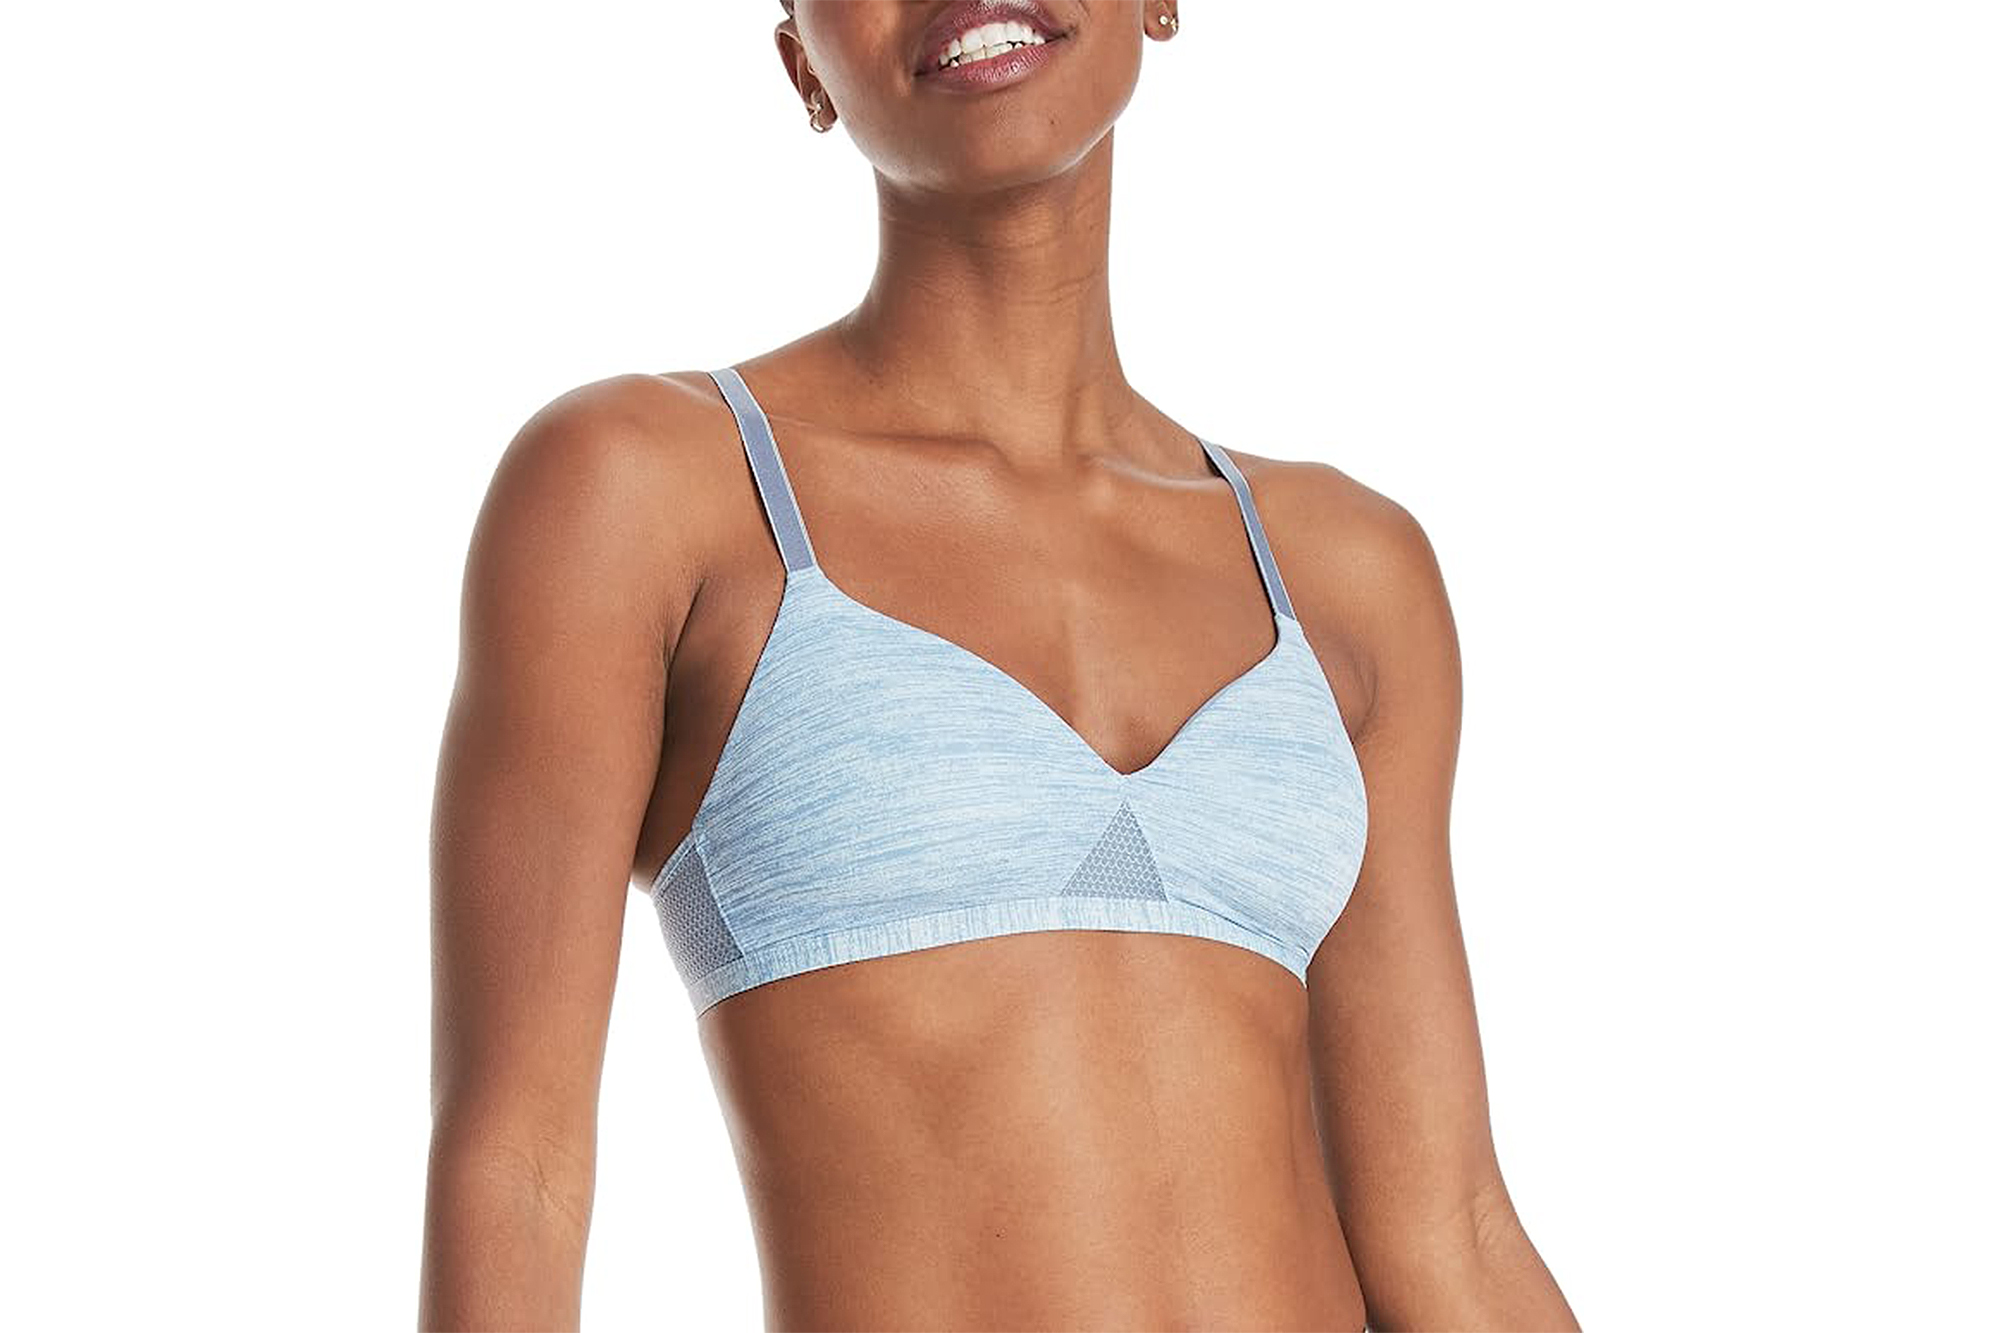 Hanes Bestselling Wireless Bra Feels Super Lightweight and Comfy